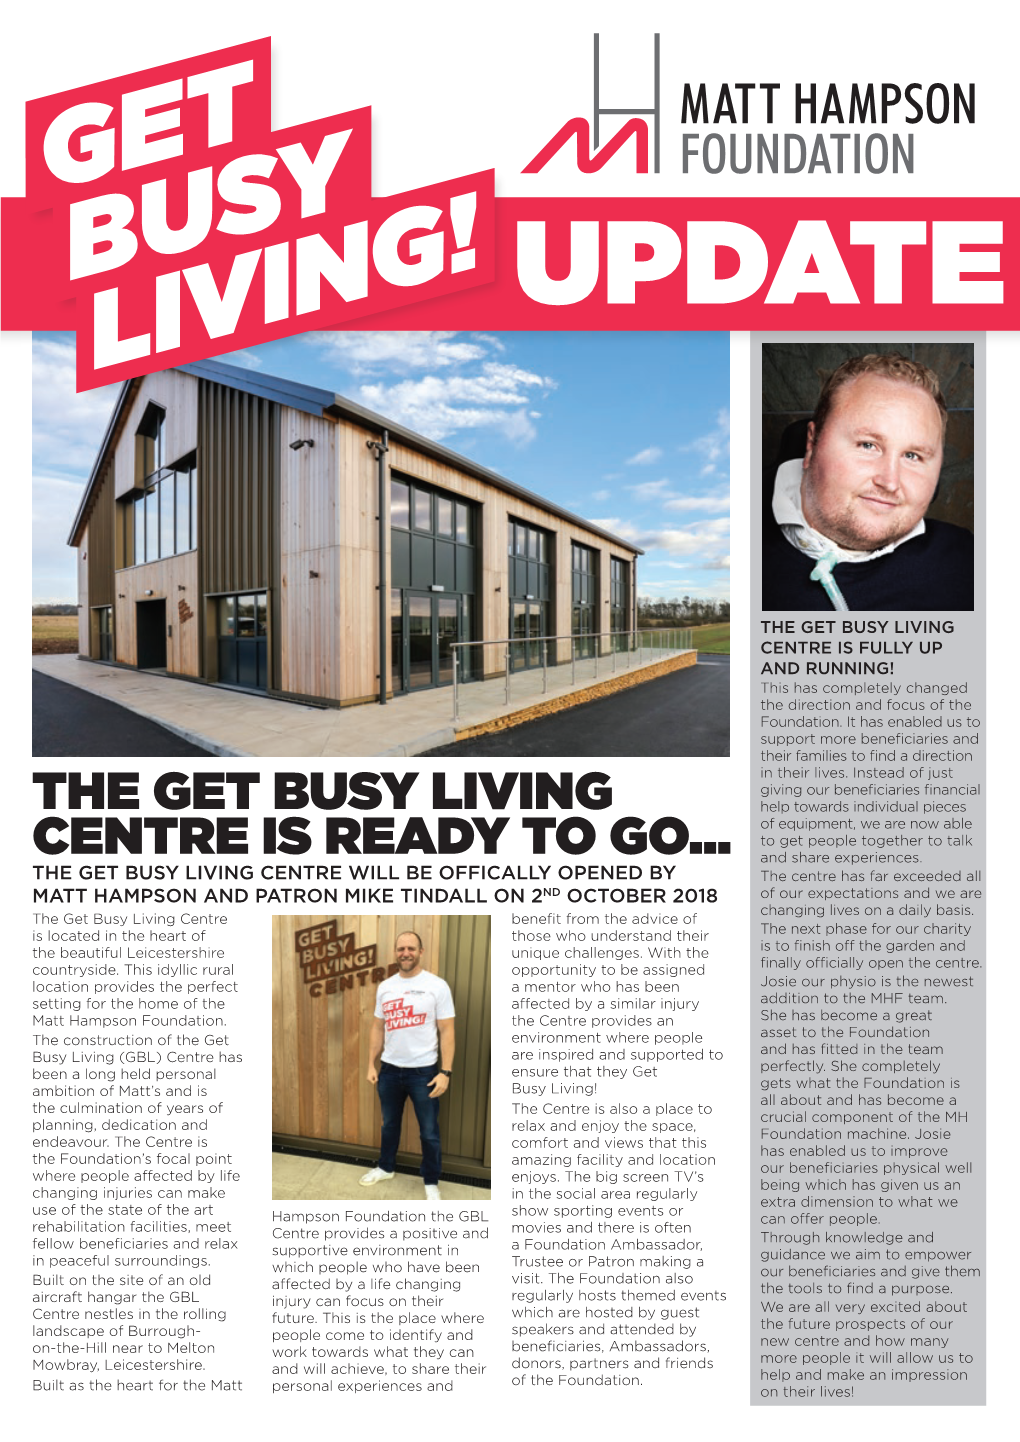 The Get Busy Living Centre Is Ready to Go